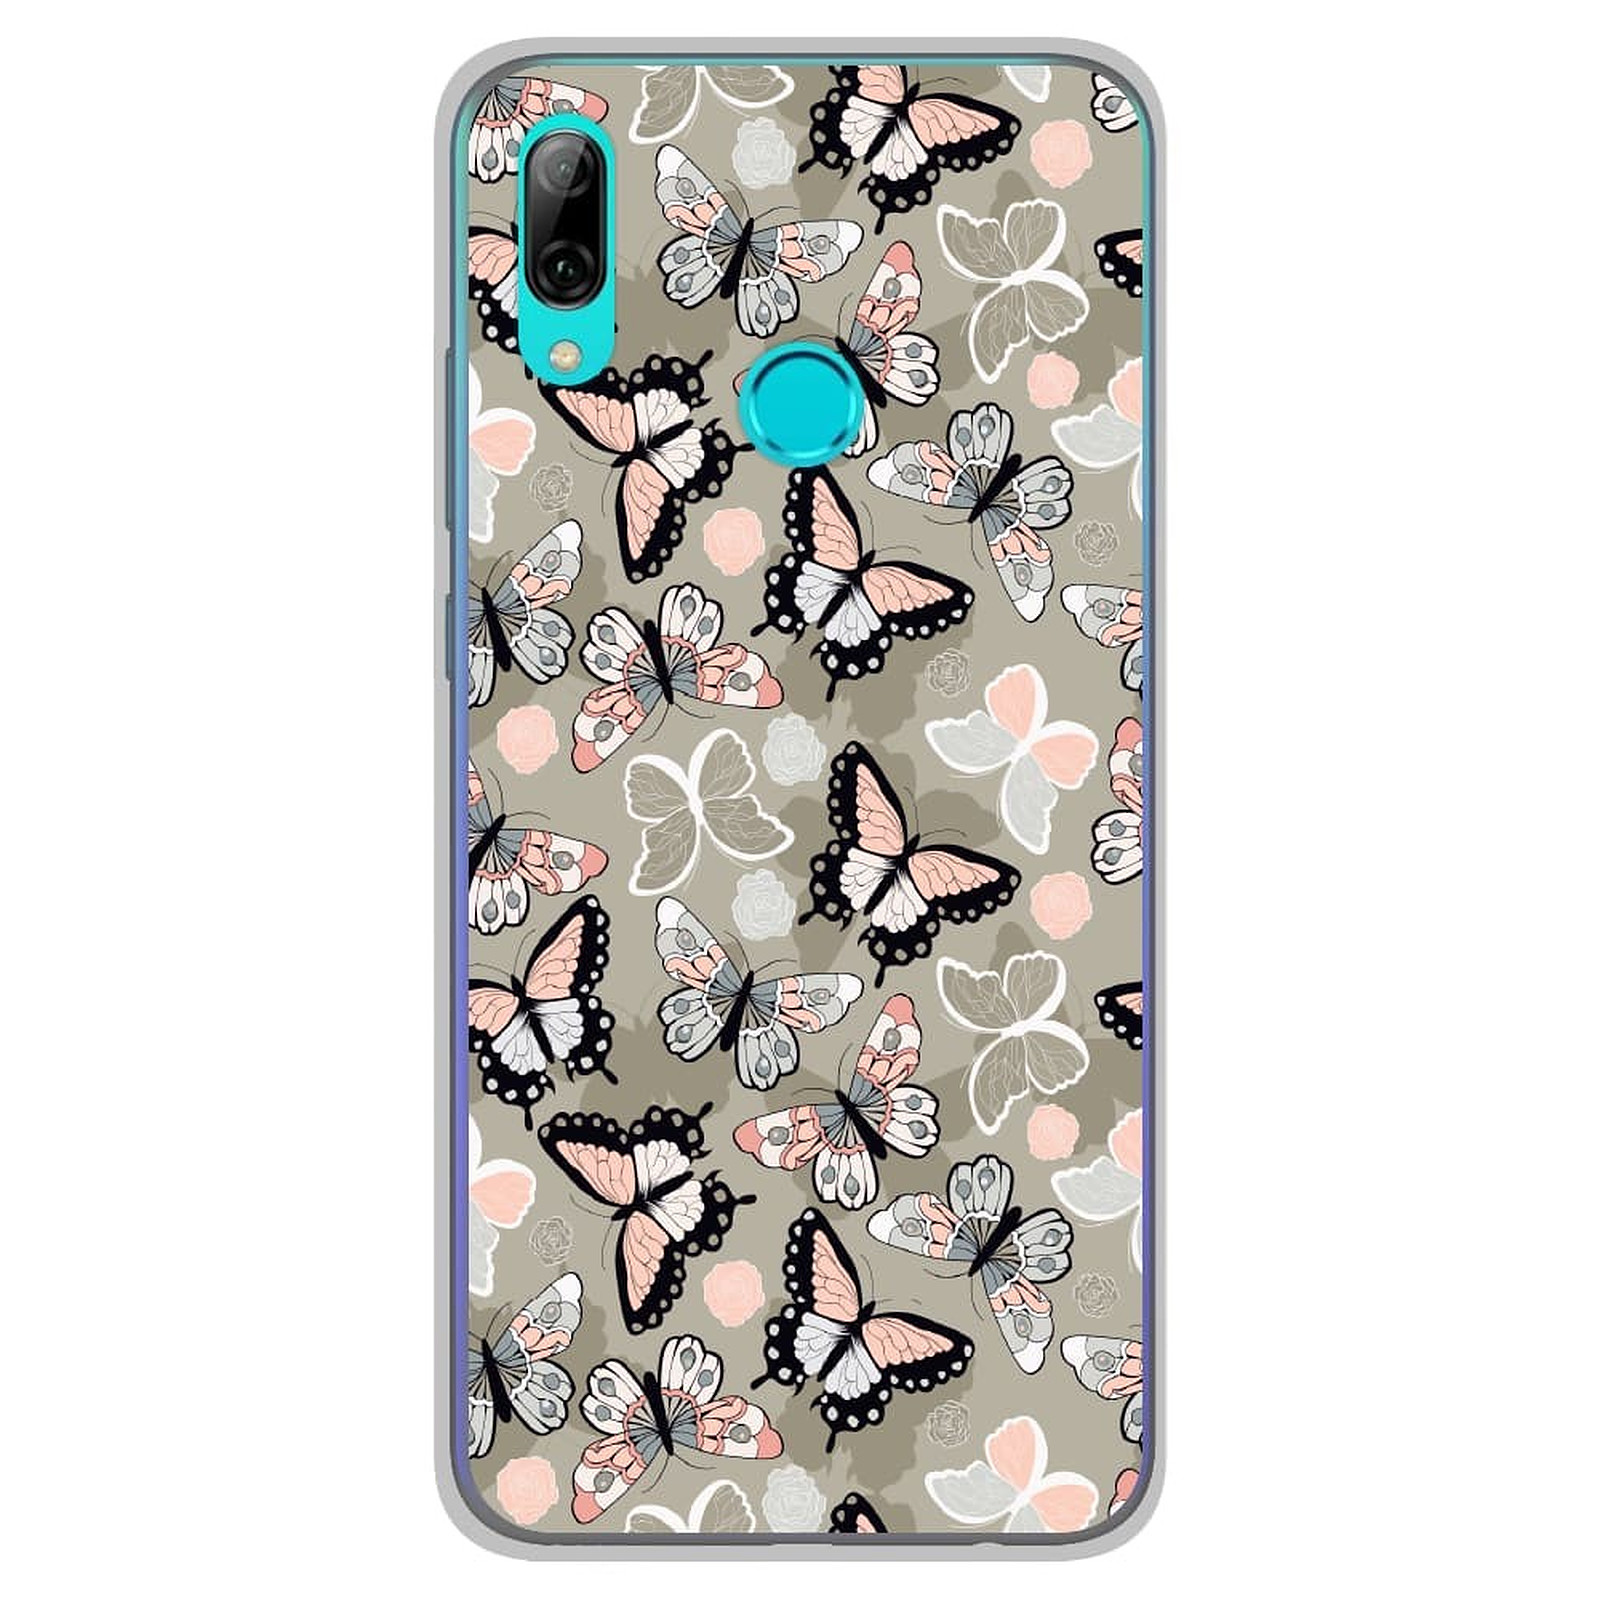 1001 Coques Coque silicone gel Huawei P Smart 2019 motif Papillons Vintage - Coque telephone 1001Coques